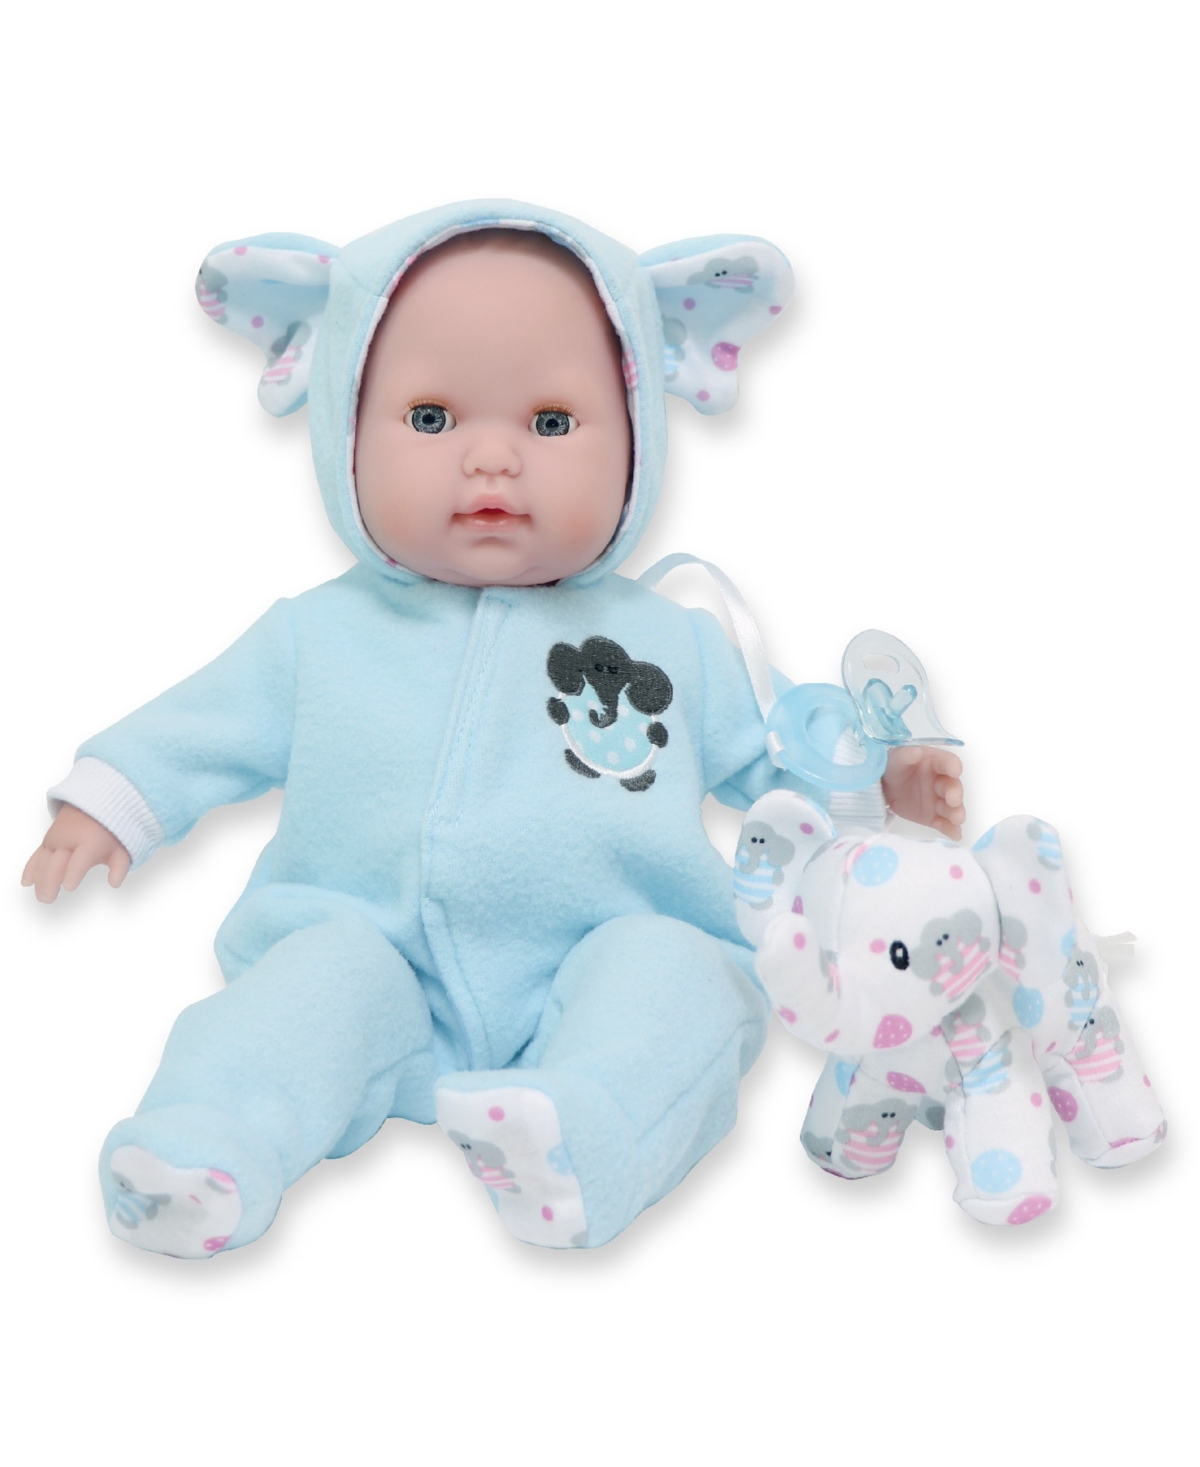 Jc Toys Berenguer Boutique 15" Soft Body Baby Doll Elephant Blue Outfit In Blue Elephant Theme